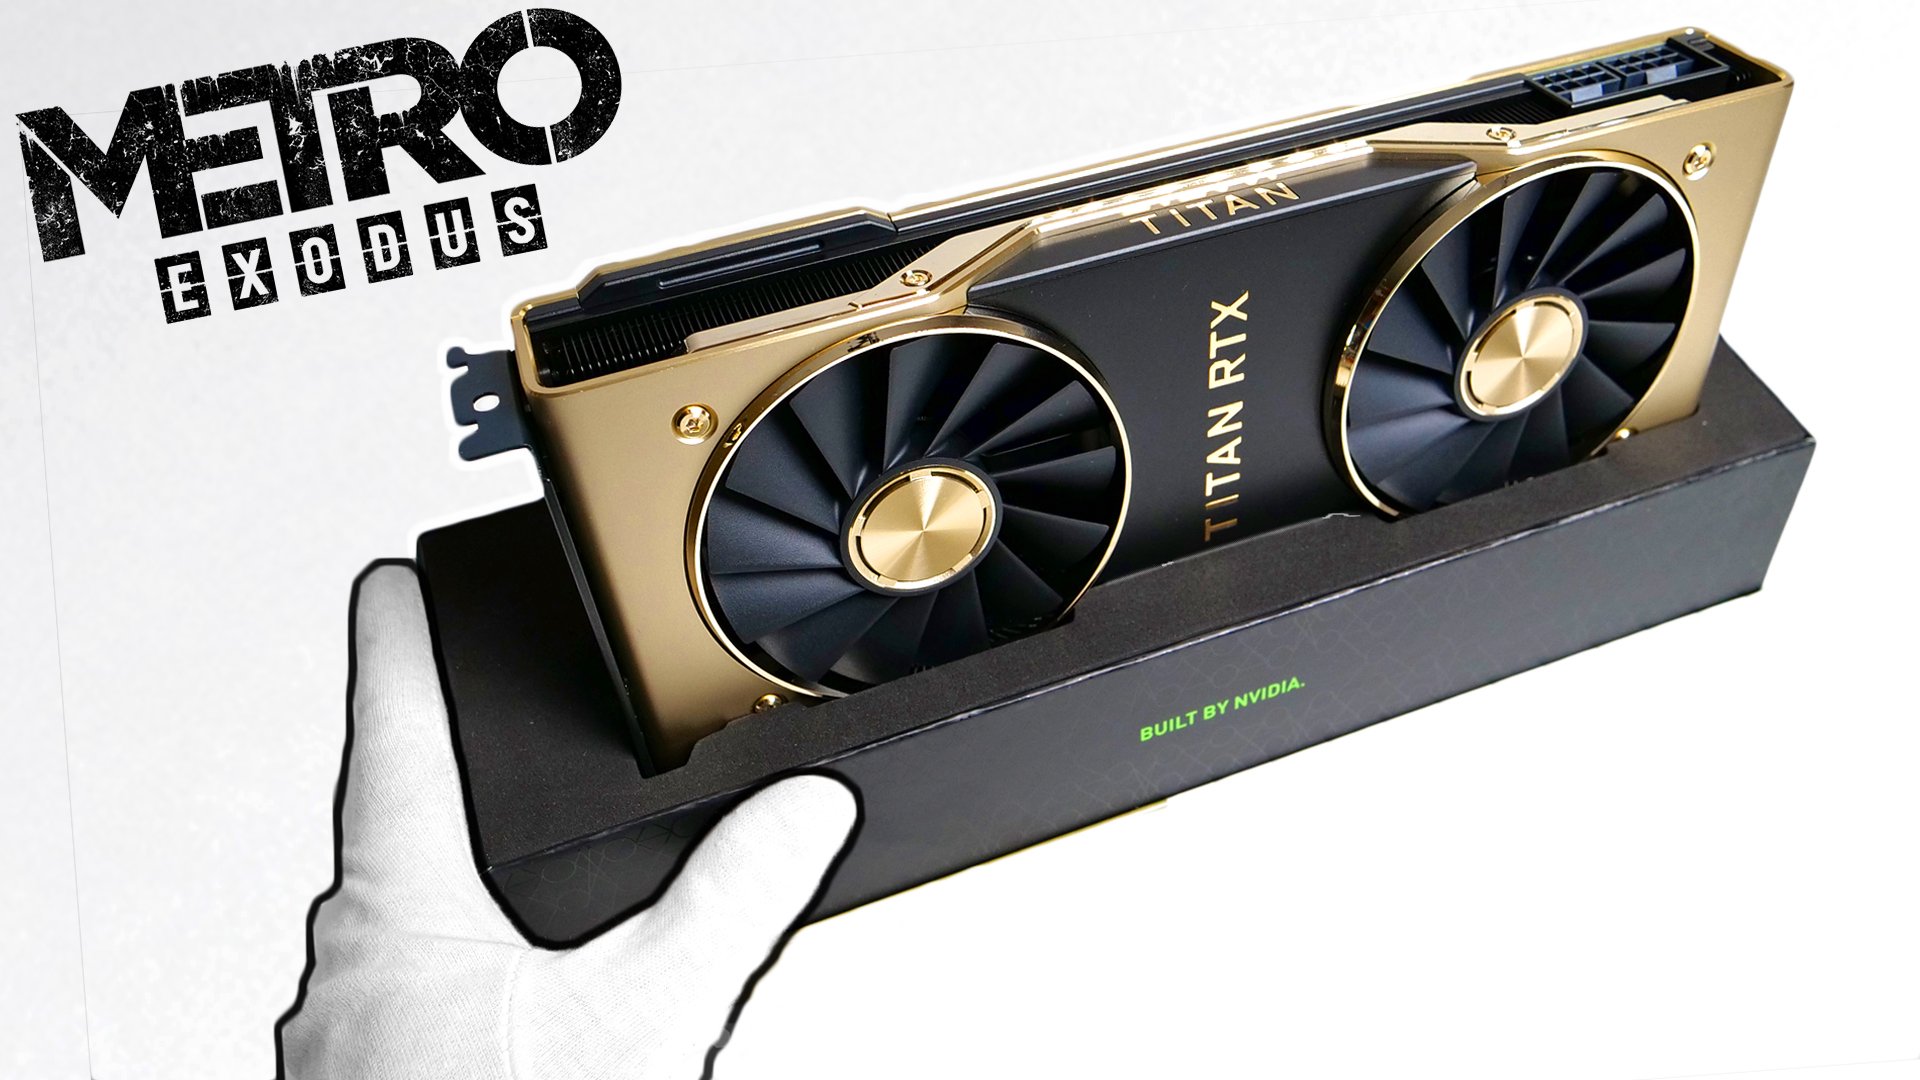 TheRelaxingEnd on Twitter: "Unboxing the Nvidia Titan RTX graphics card + Metro Exodus 18 minutes of pure gameplay Awesome new post-apocalyptic single player first person by @4AGames @MetroVideoGame #MetroExodus https ...